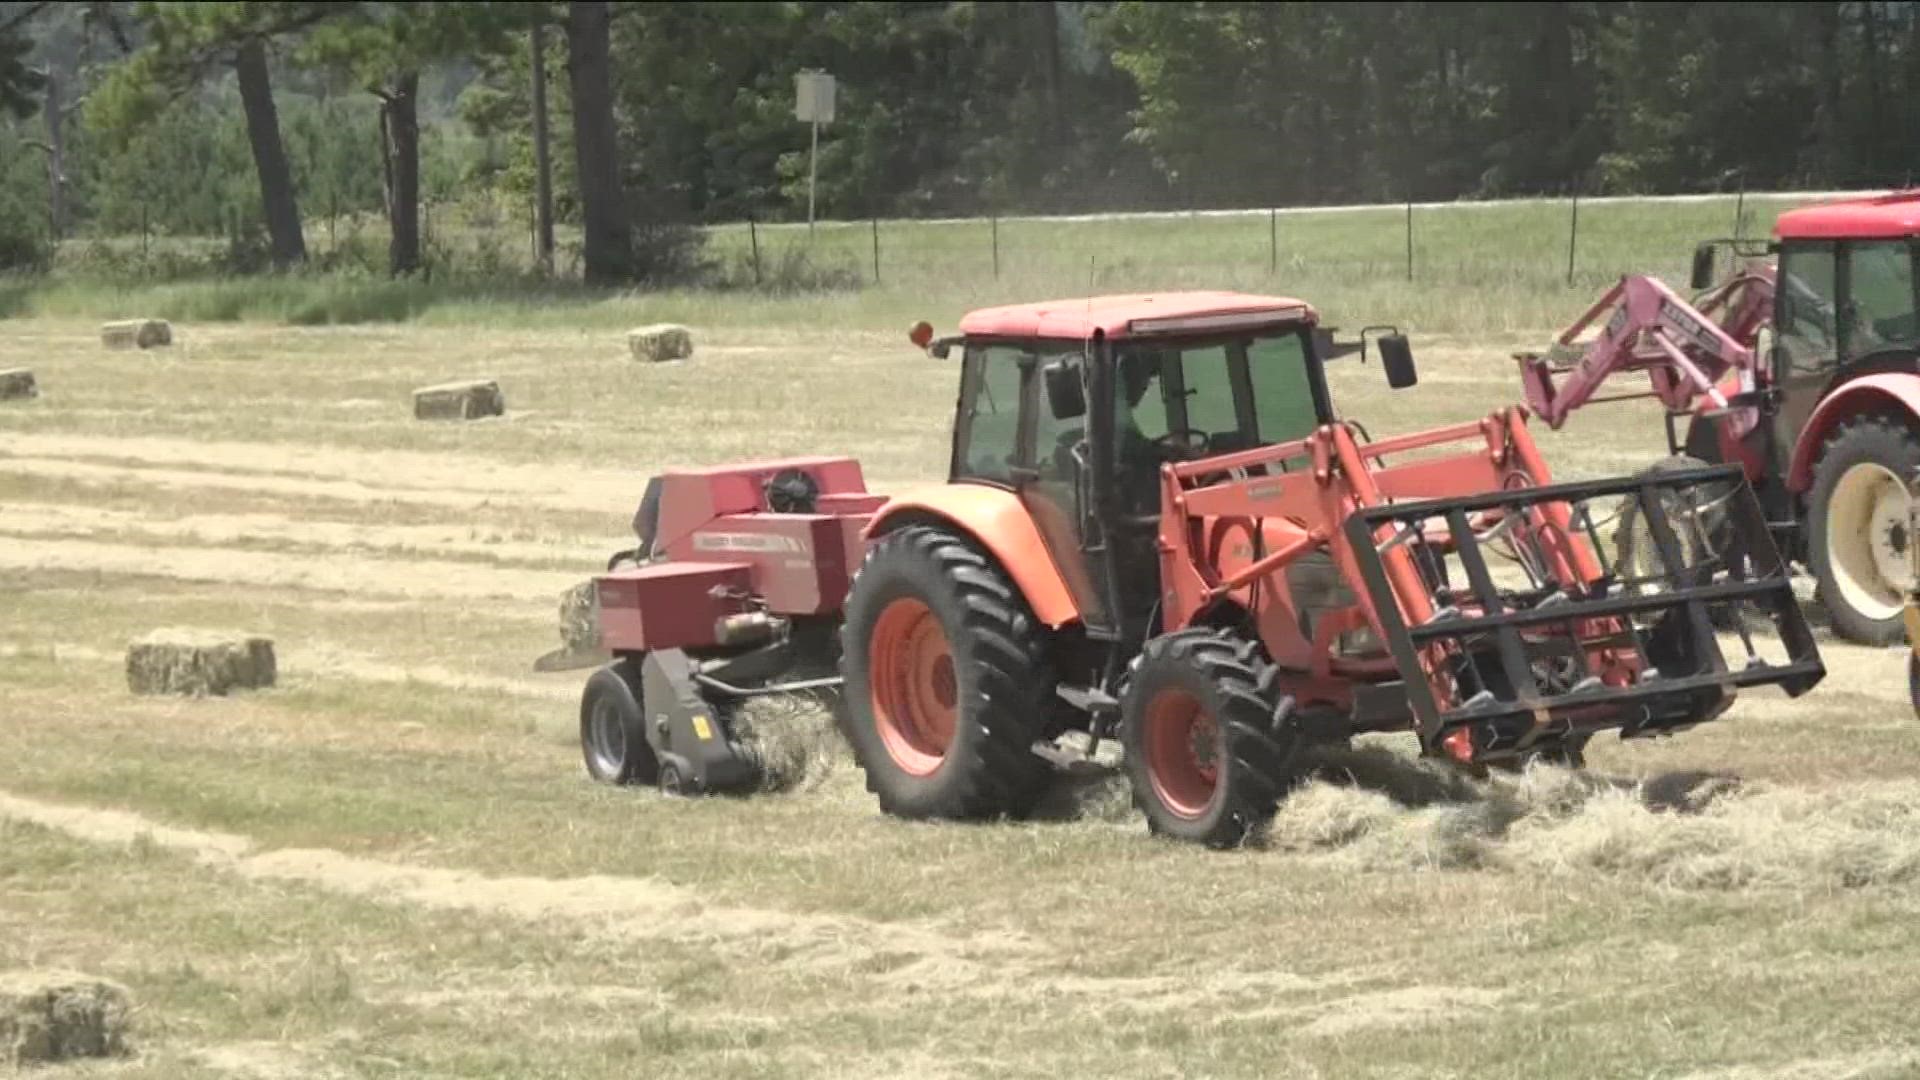 East Texas hay farms trying to bale the heat